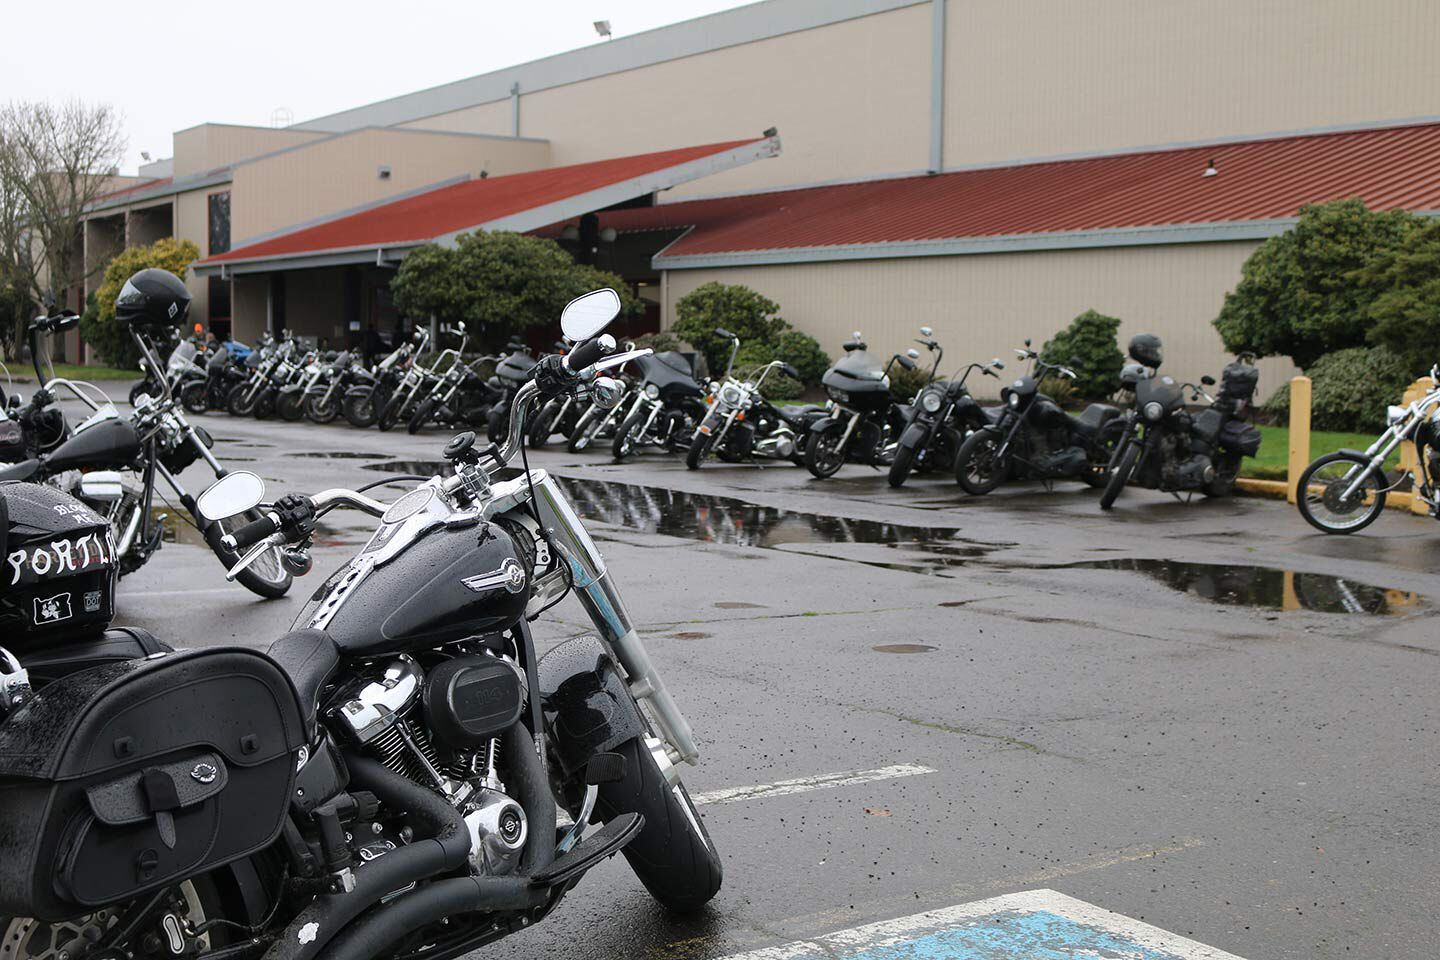 Oregon enthusiasts didn’t let a little rain dampen their spirits as many still rode to the show.